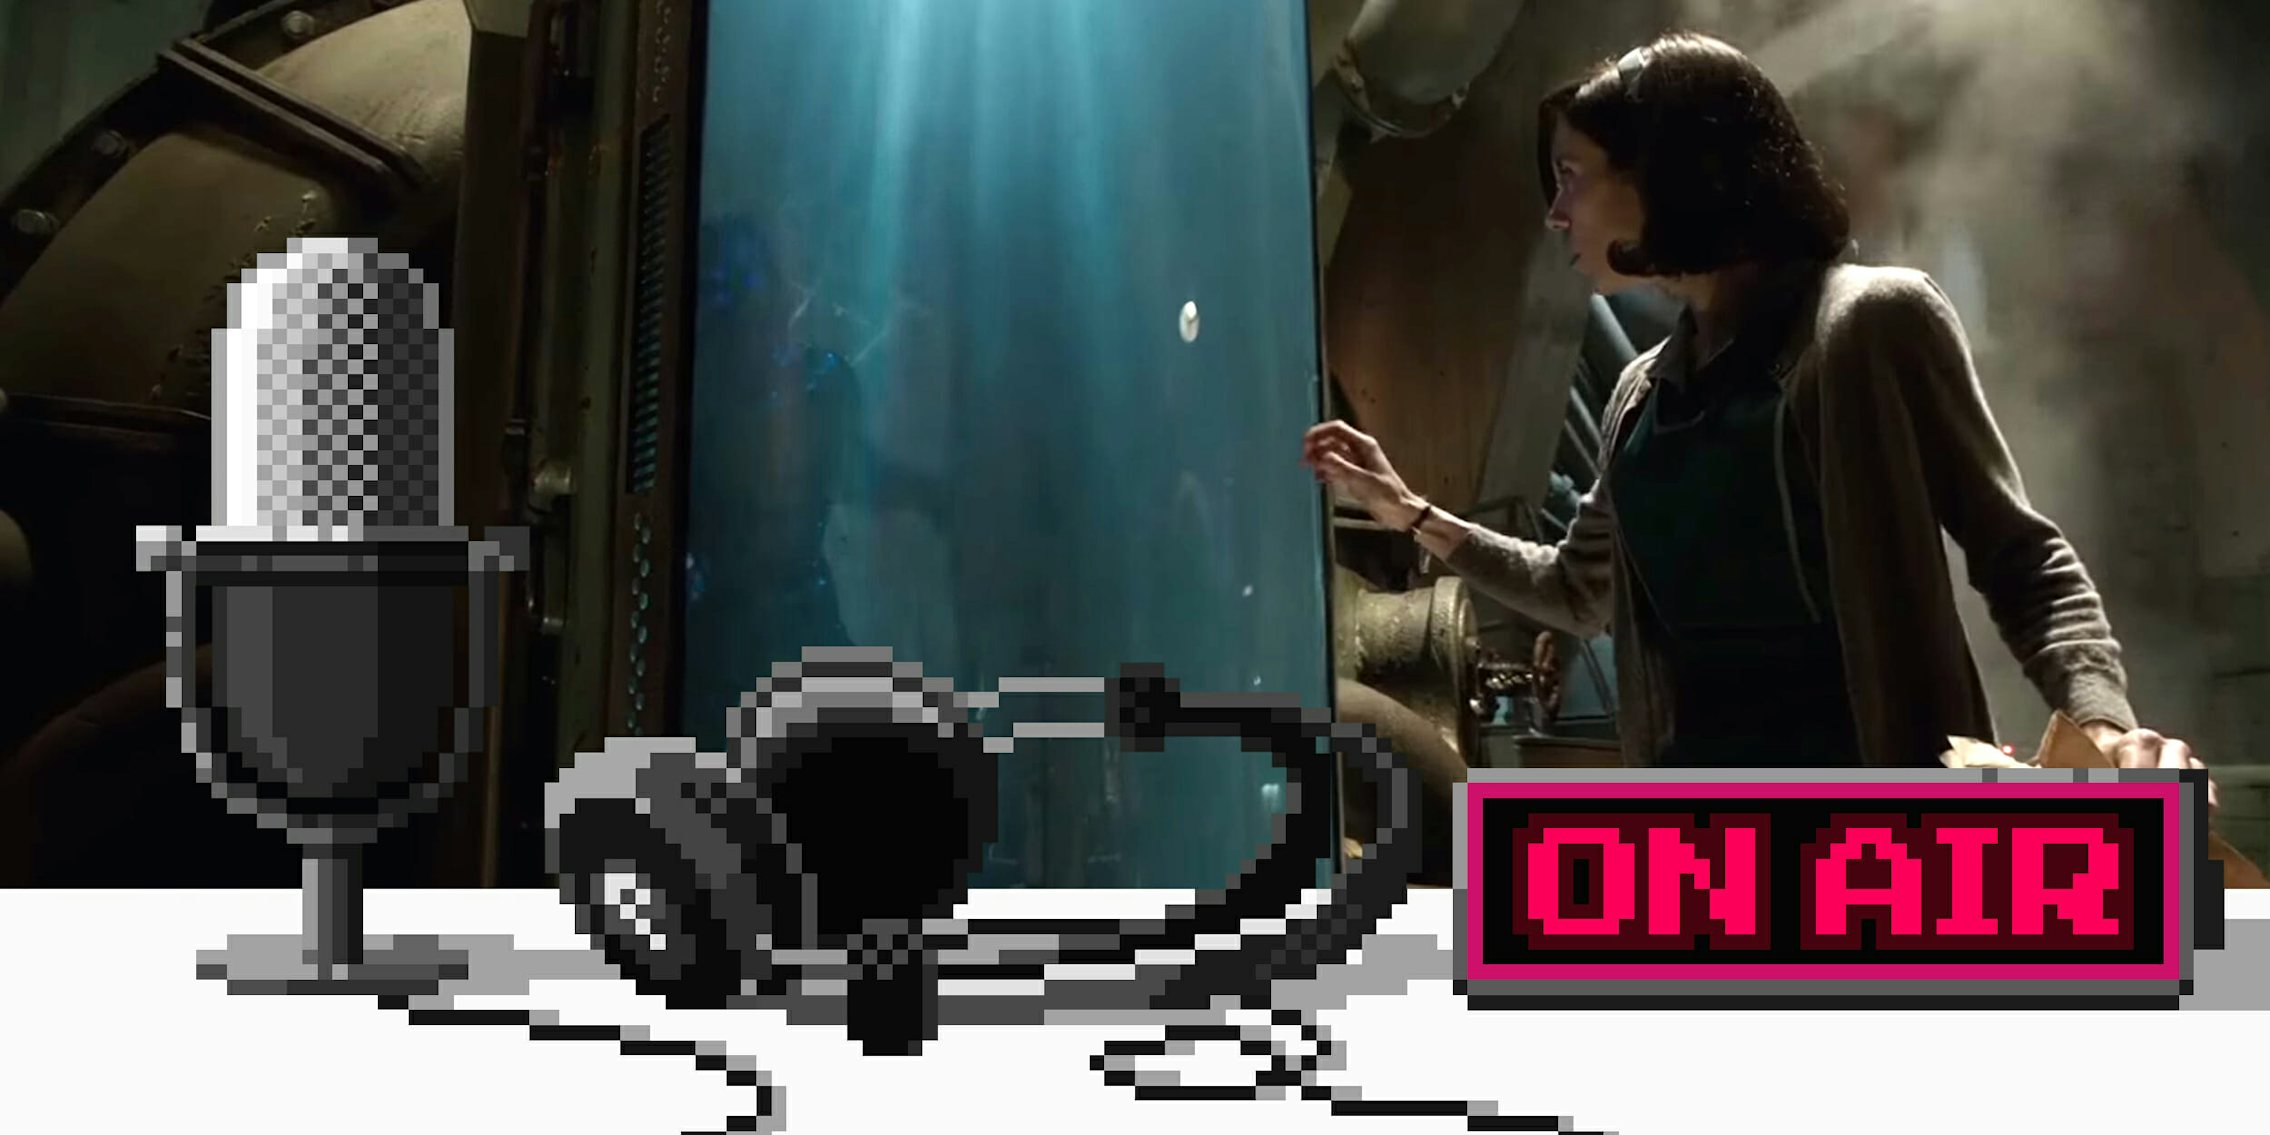 Upstream podcast discusses The Shape of Water